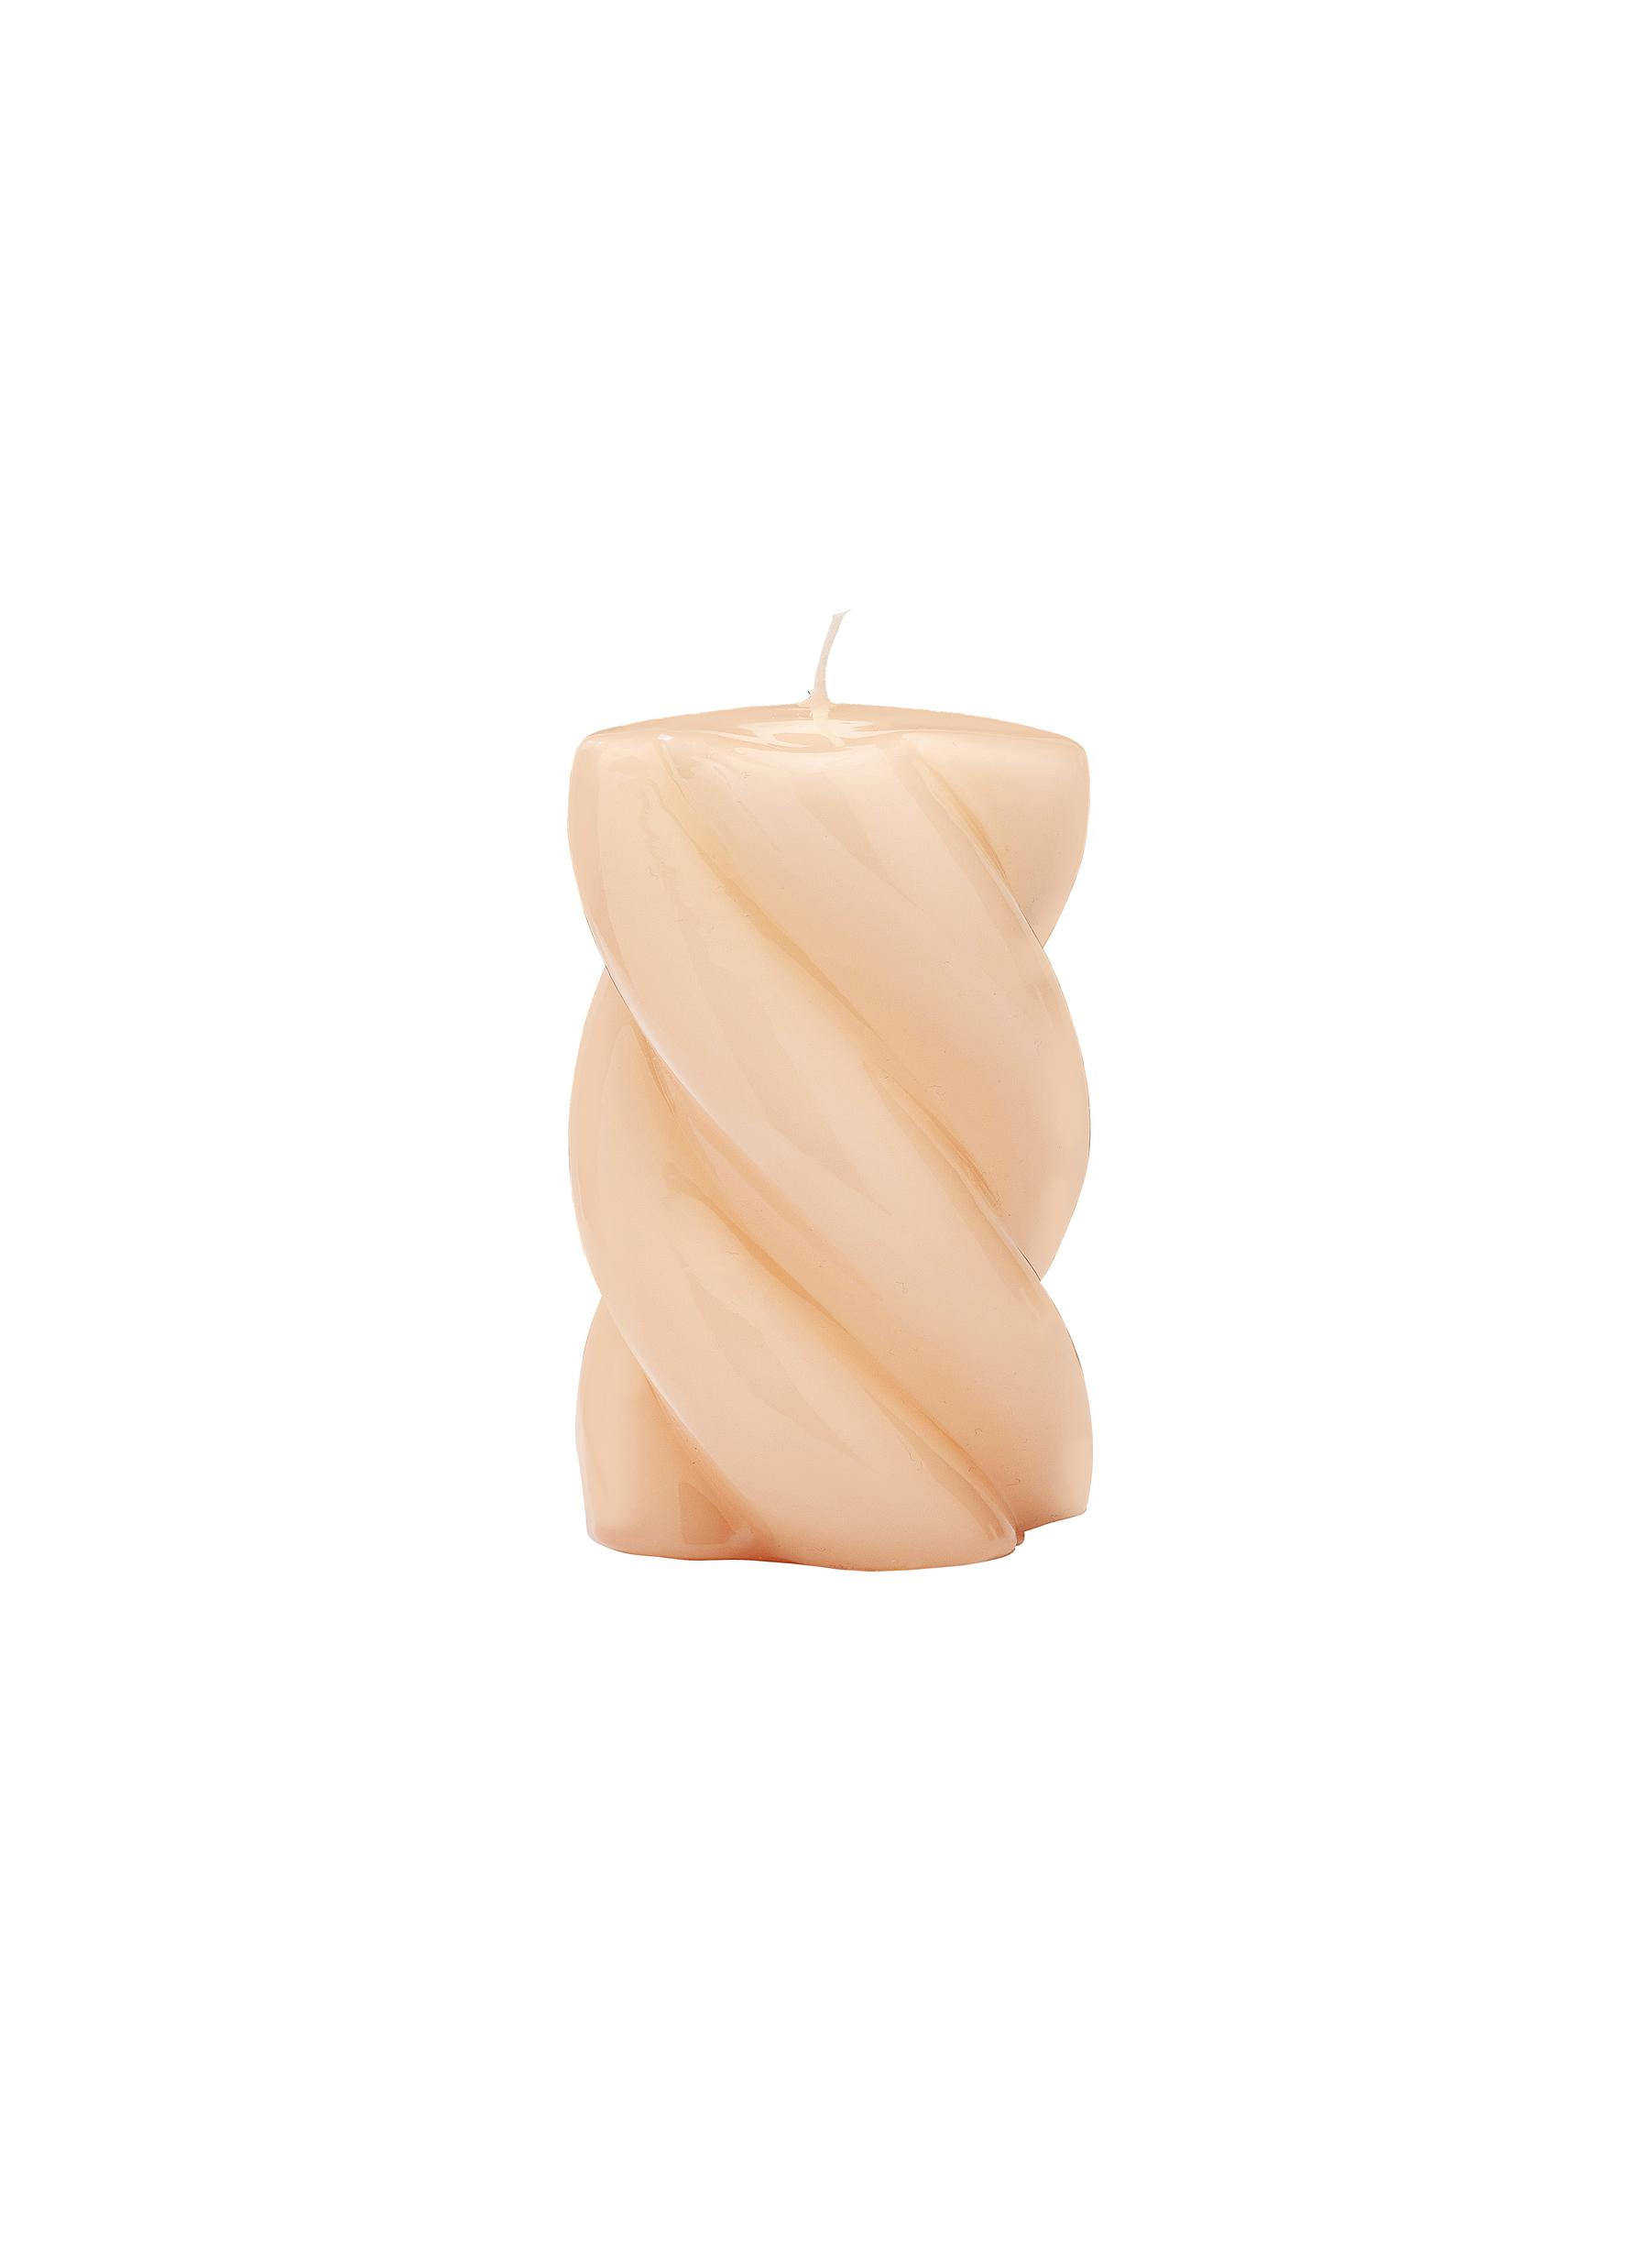 Anna + Nina Blunt Twisted Short Candle - Nude